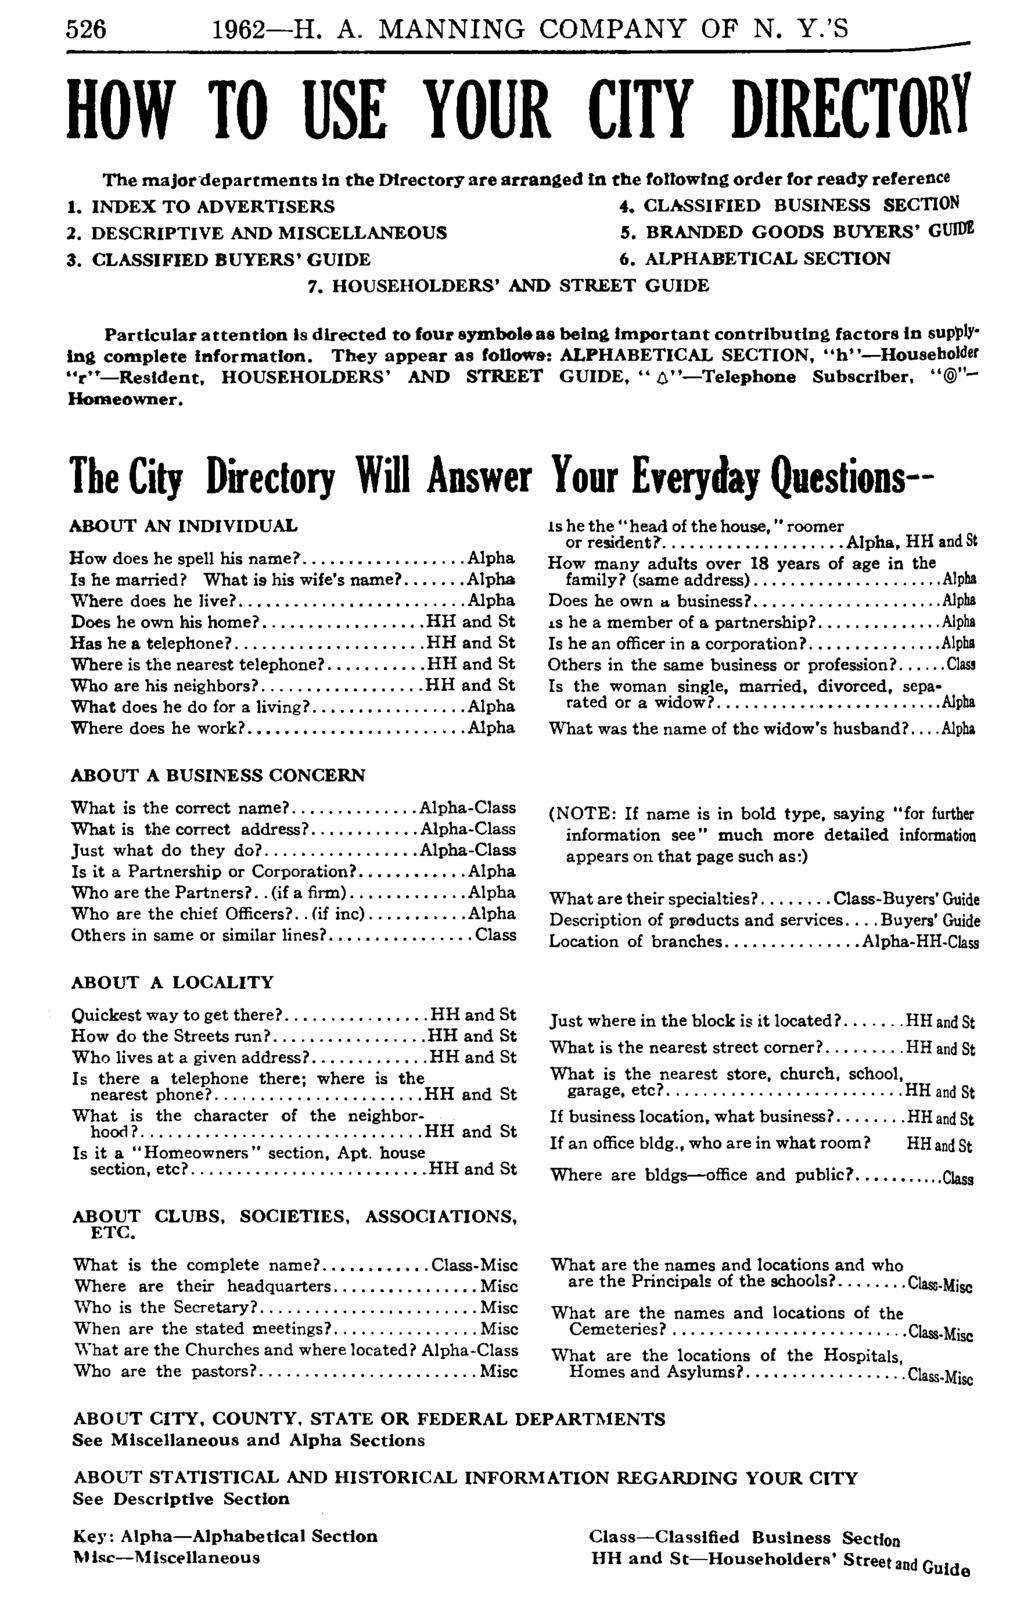 526 1962-H. A. MANNING COMPANY OF N. Y.'S HOW TO USE YOUR CITY DIRECTORY The majordeparrments in the Directoryare arranged in the fonowlng order for ready reference 1.